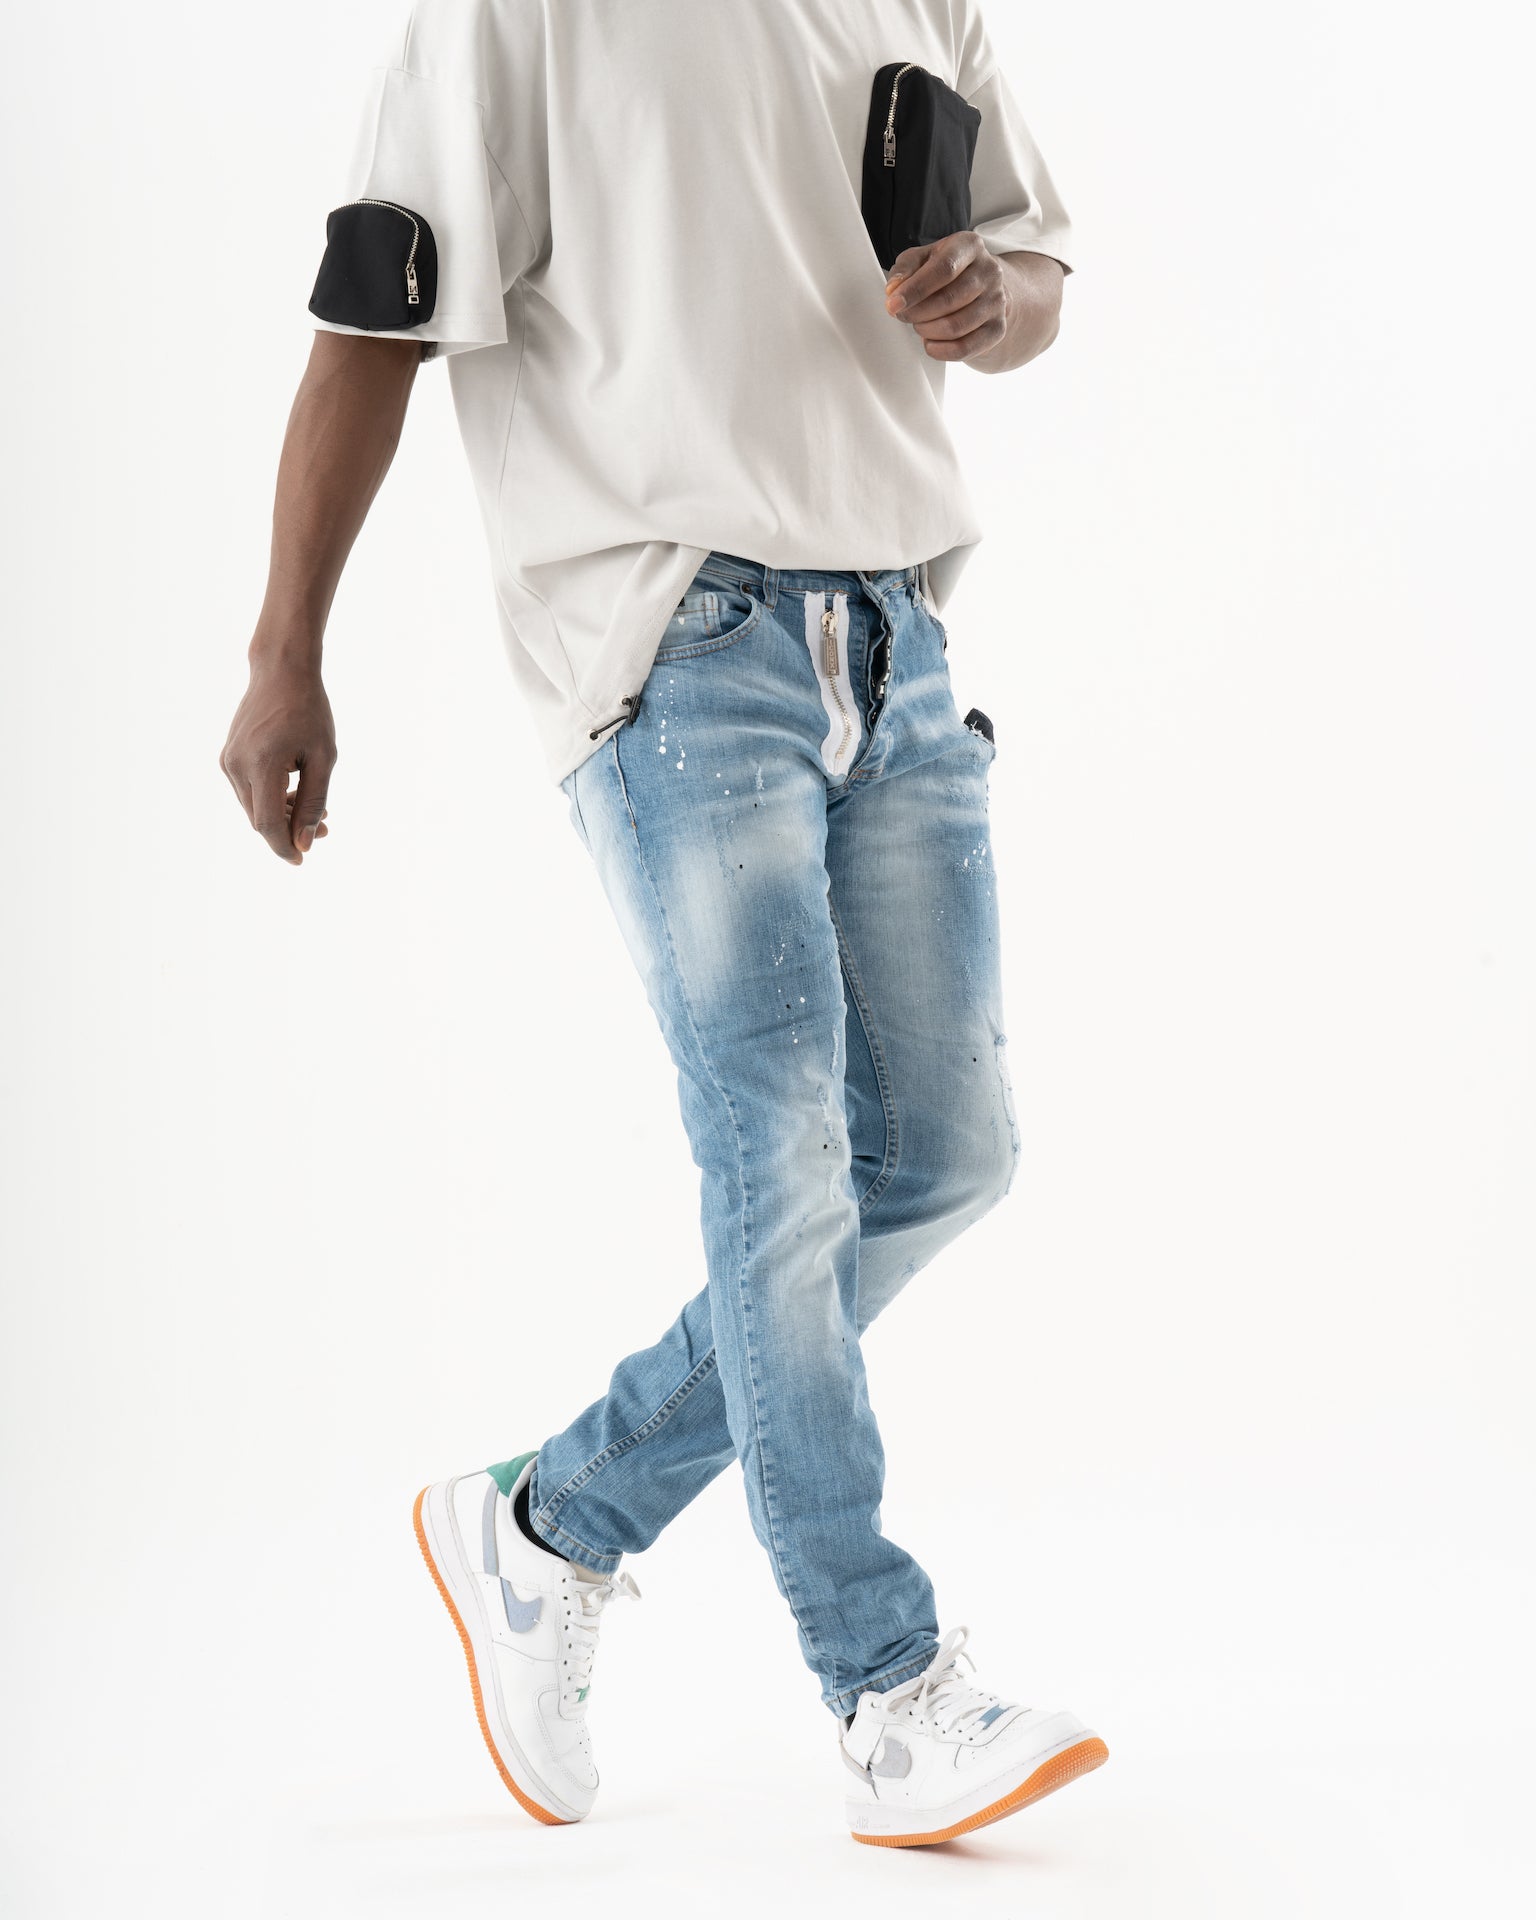 A man wearing SKATER jeans and a white t-shirt.